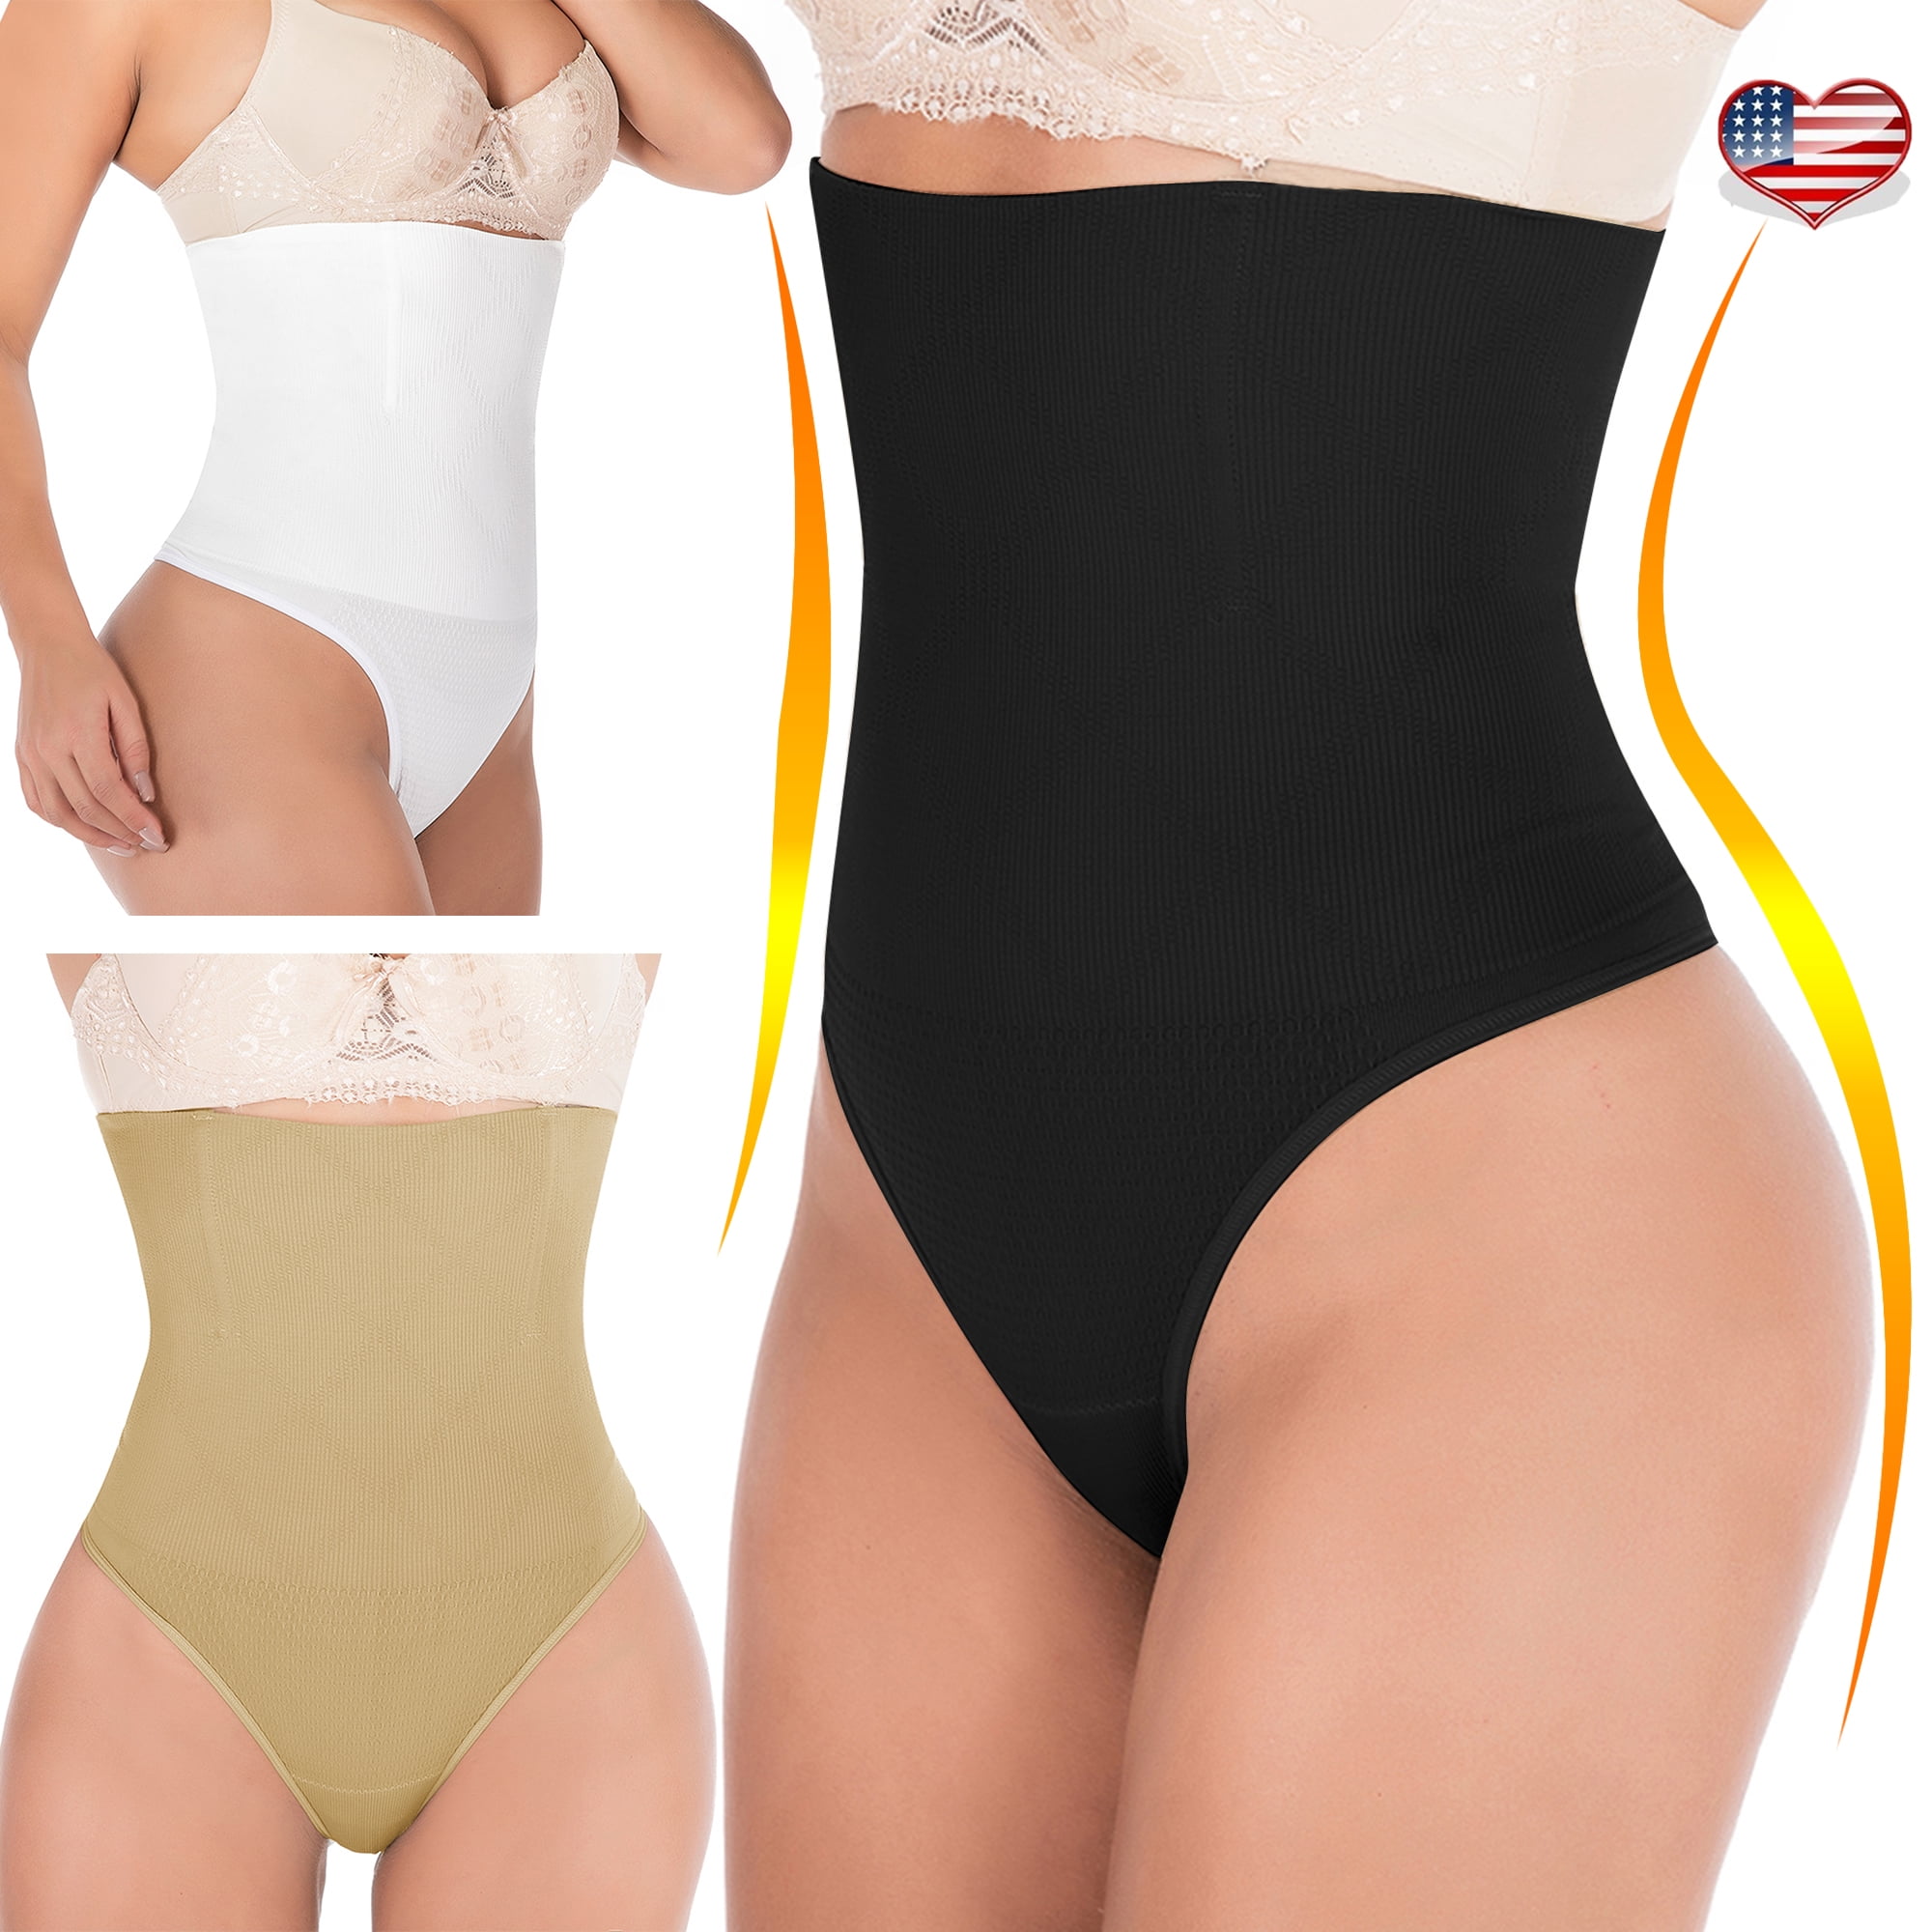 MANIFIQUE Tummy Control Shapewear Panties for Women High Waisted Body  Shaper Underwear Lace Slimming Girdle Shaping Briefs